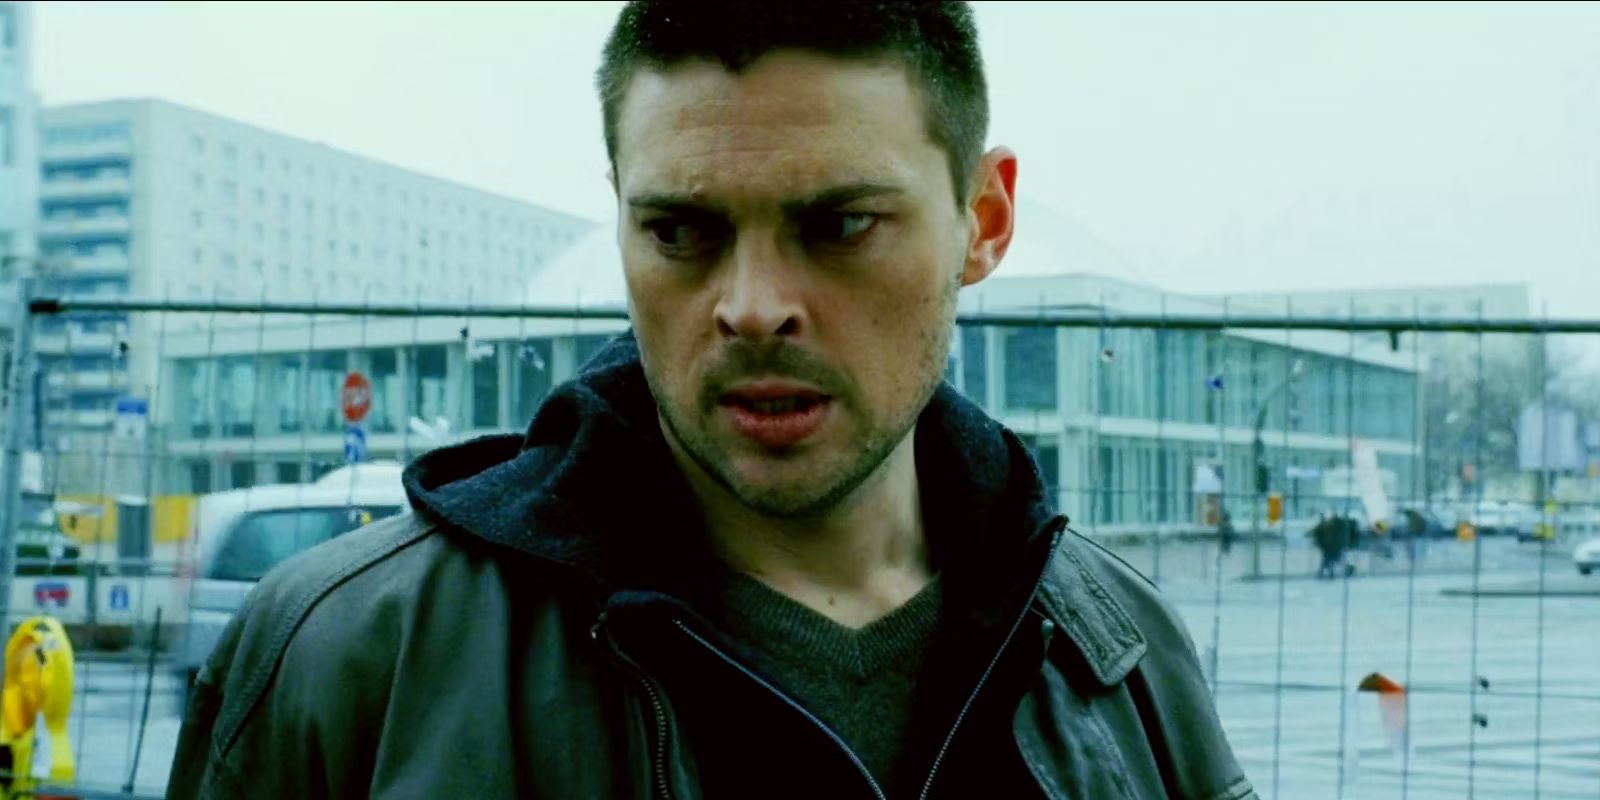 Kirill looking off-camera in The Bourne Supermacy.